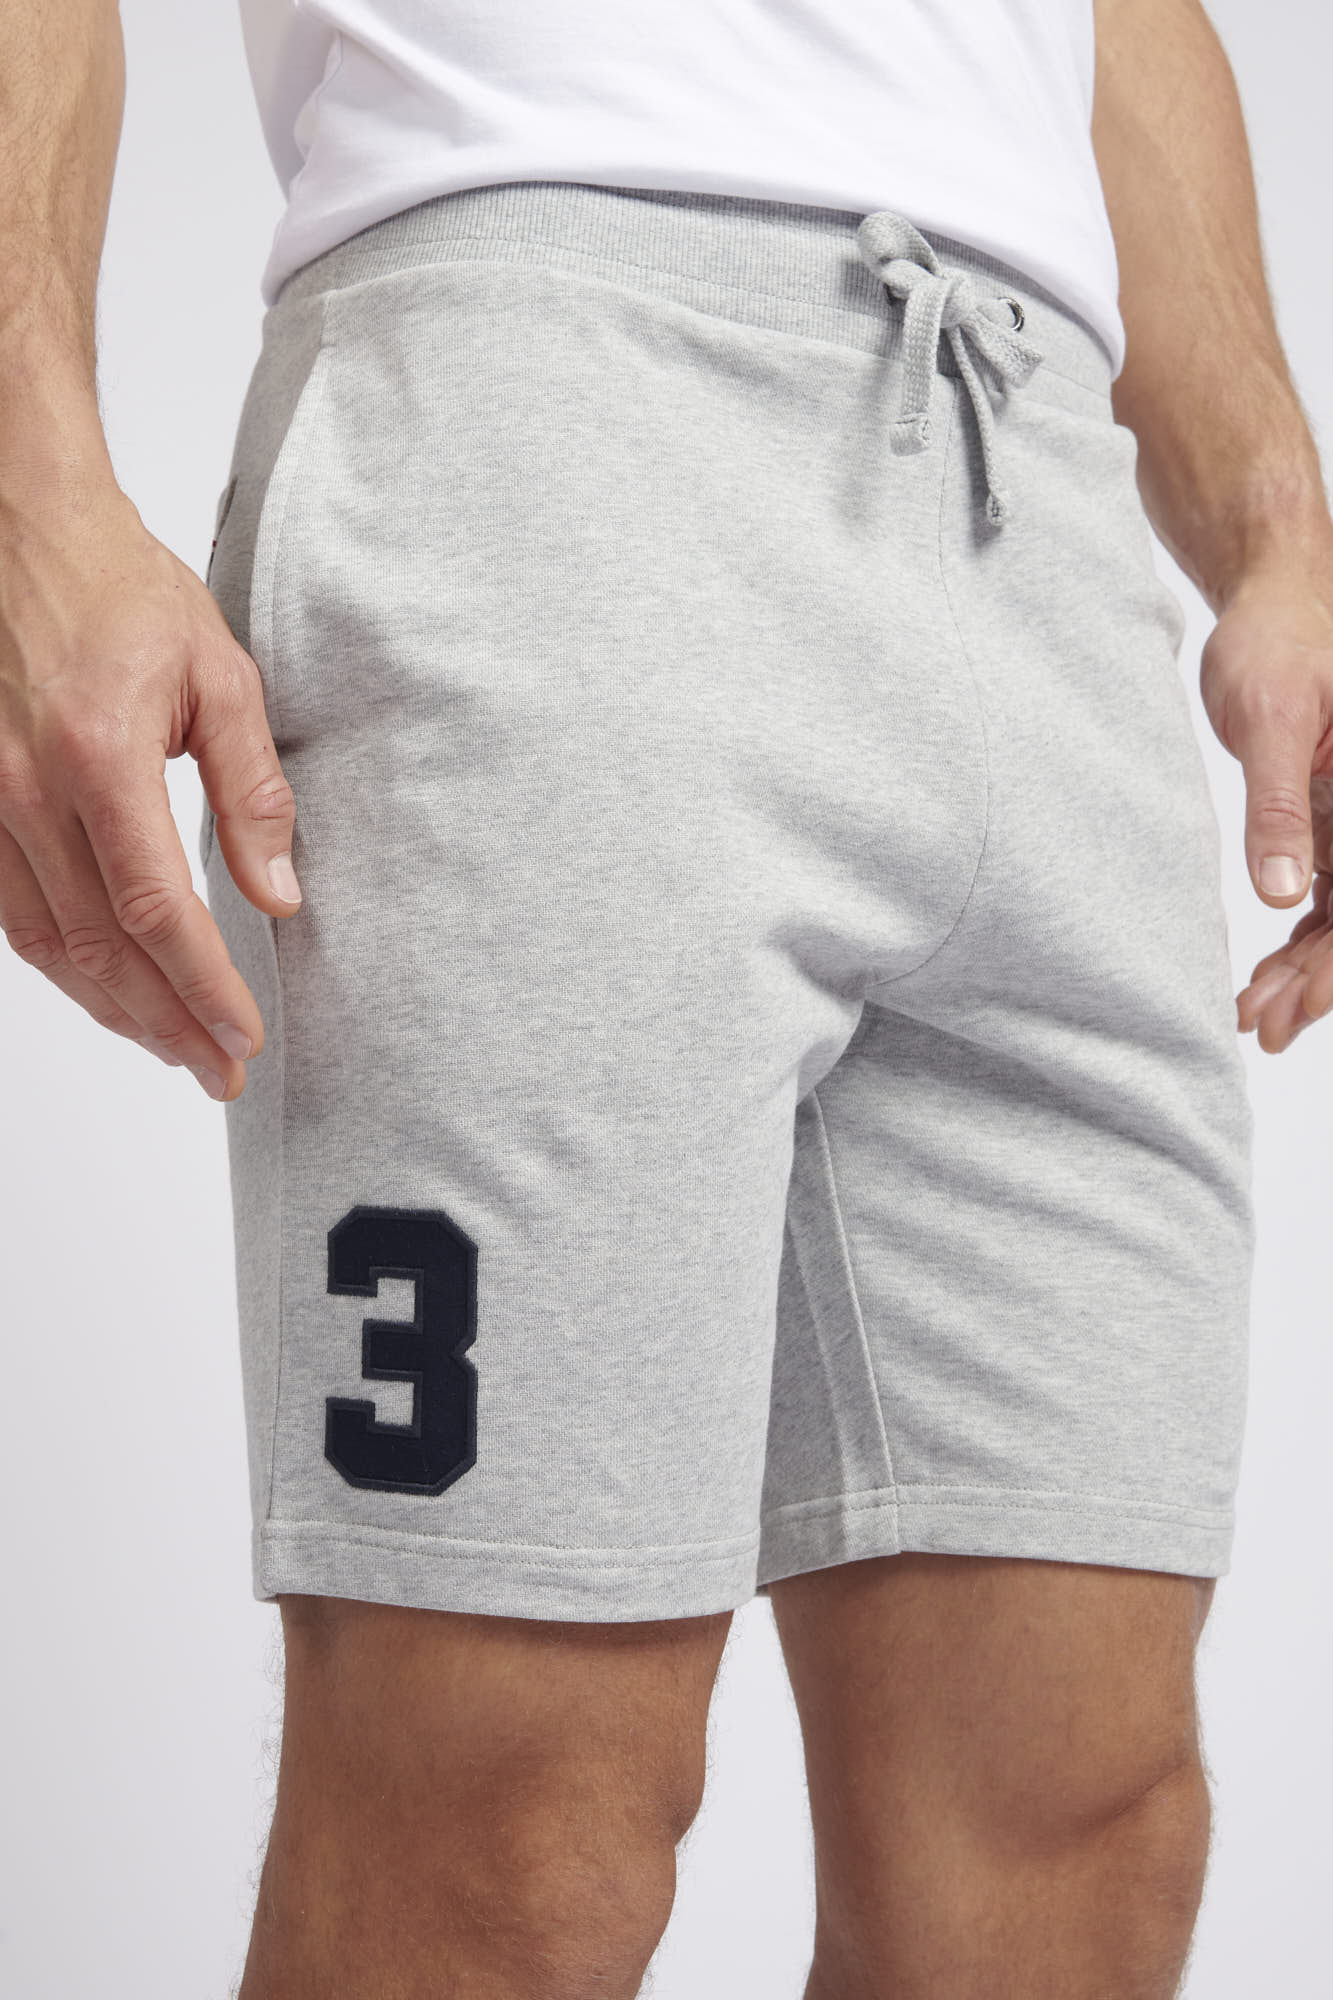 Mens Classic Fit Player 3 Sweat Shorts in Mid Grey Marl